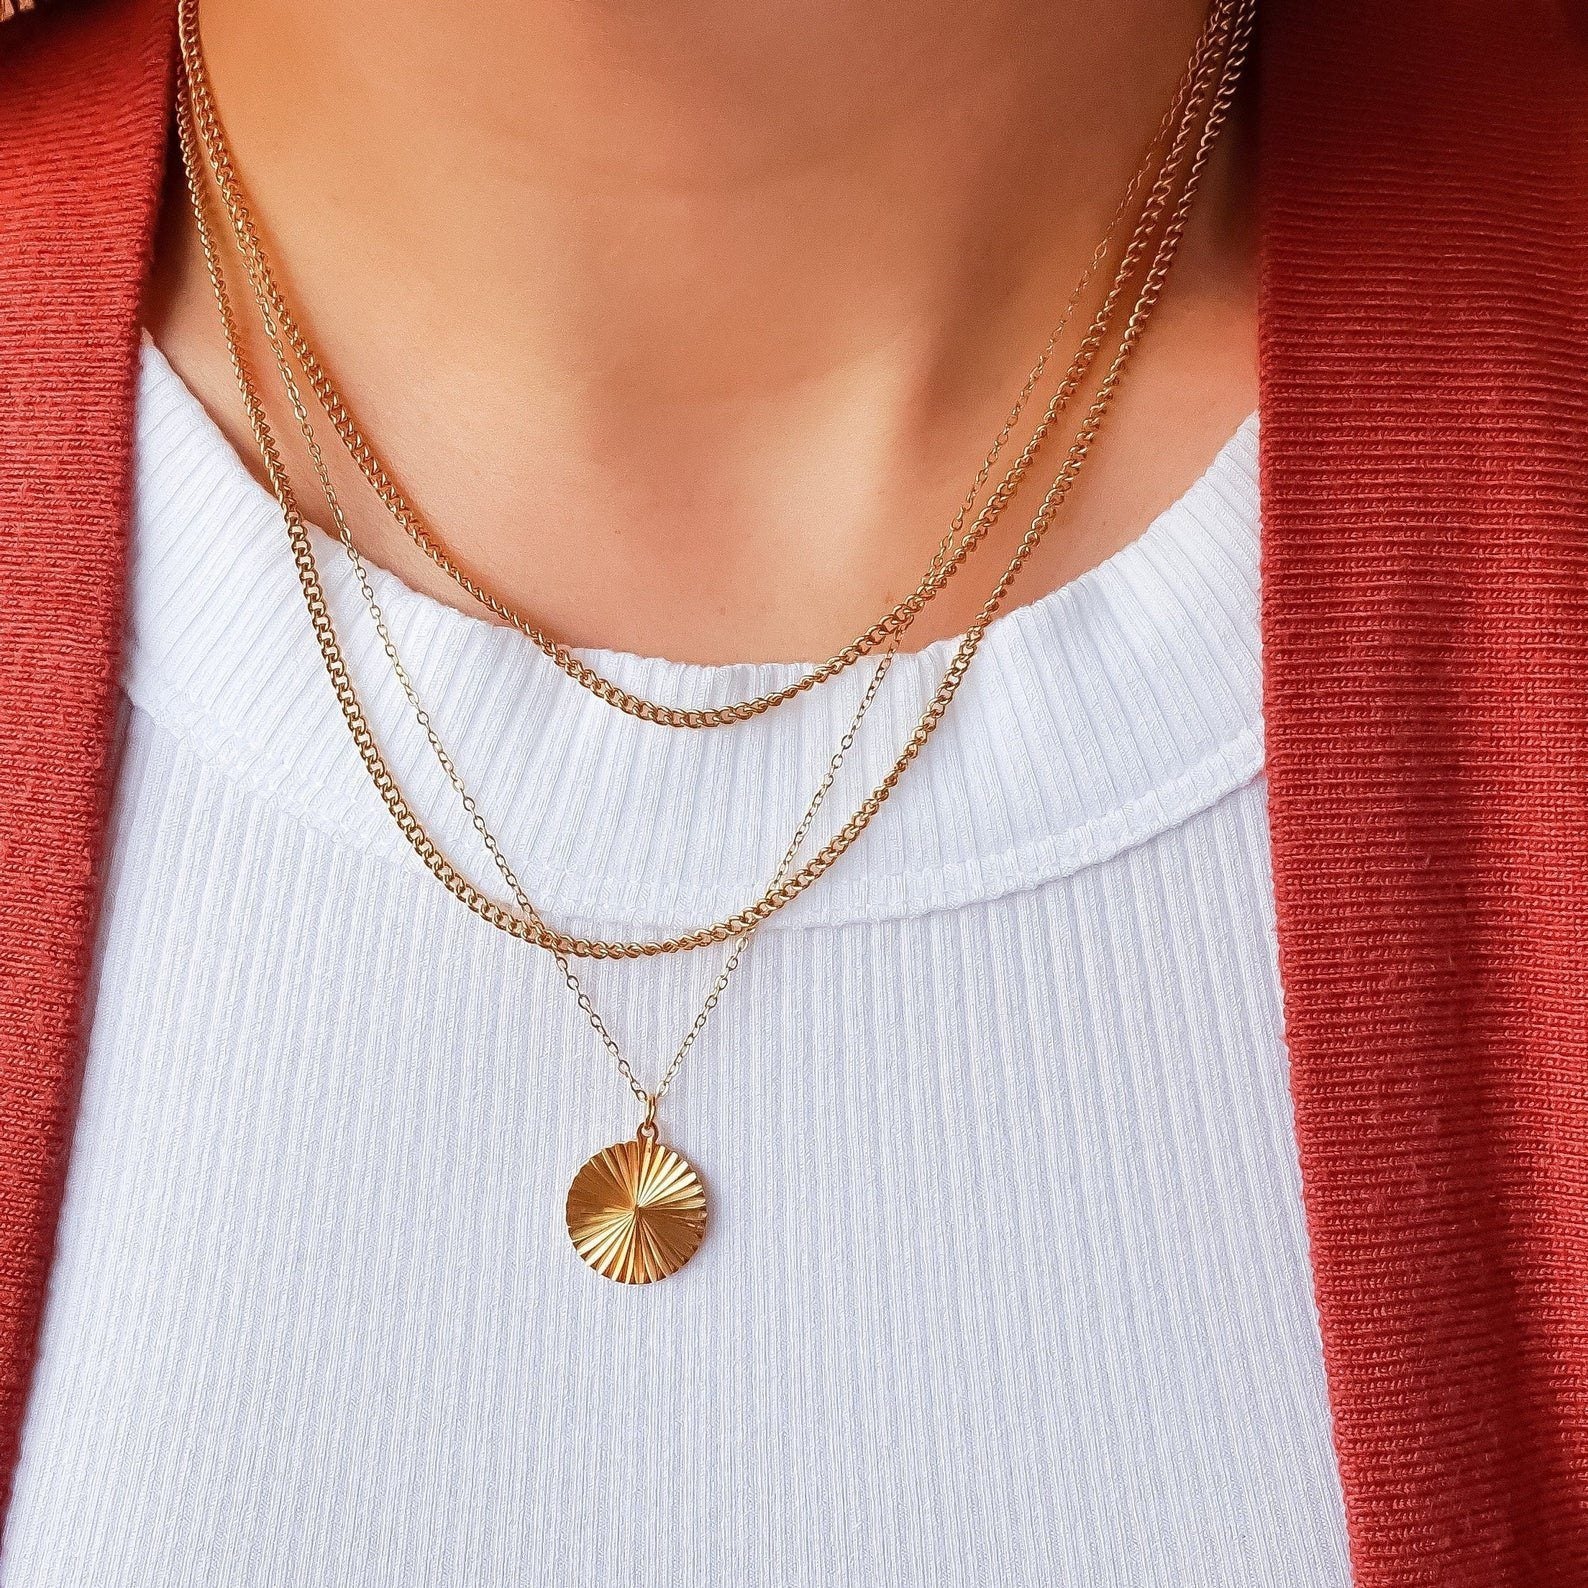 Gold Coin Charm Necklace, 18K Gold Filled Pendant Necklace, Gold Chain Necklace, Shining Sun Necklace, Coin Medallion Necklace, Gift For Her LATUKI 